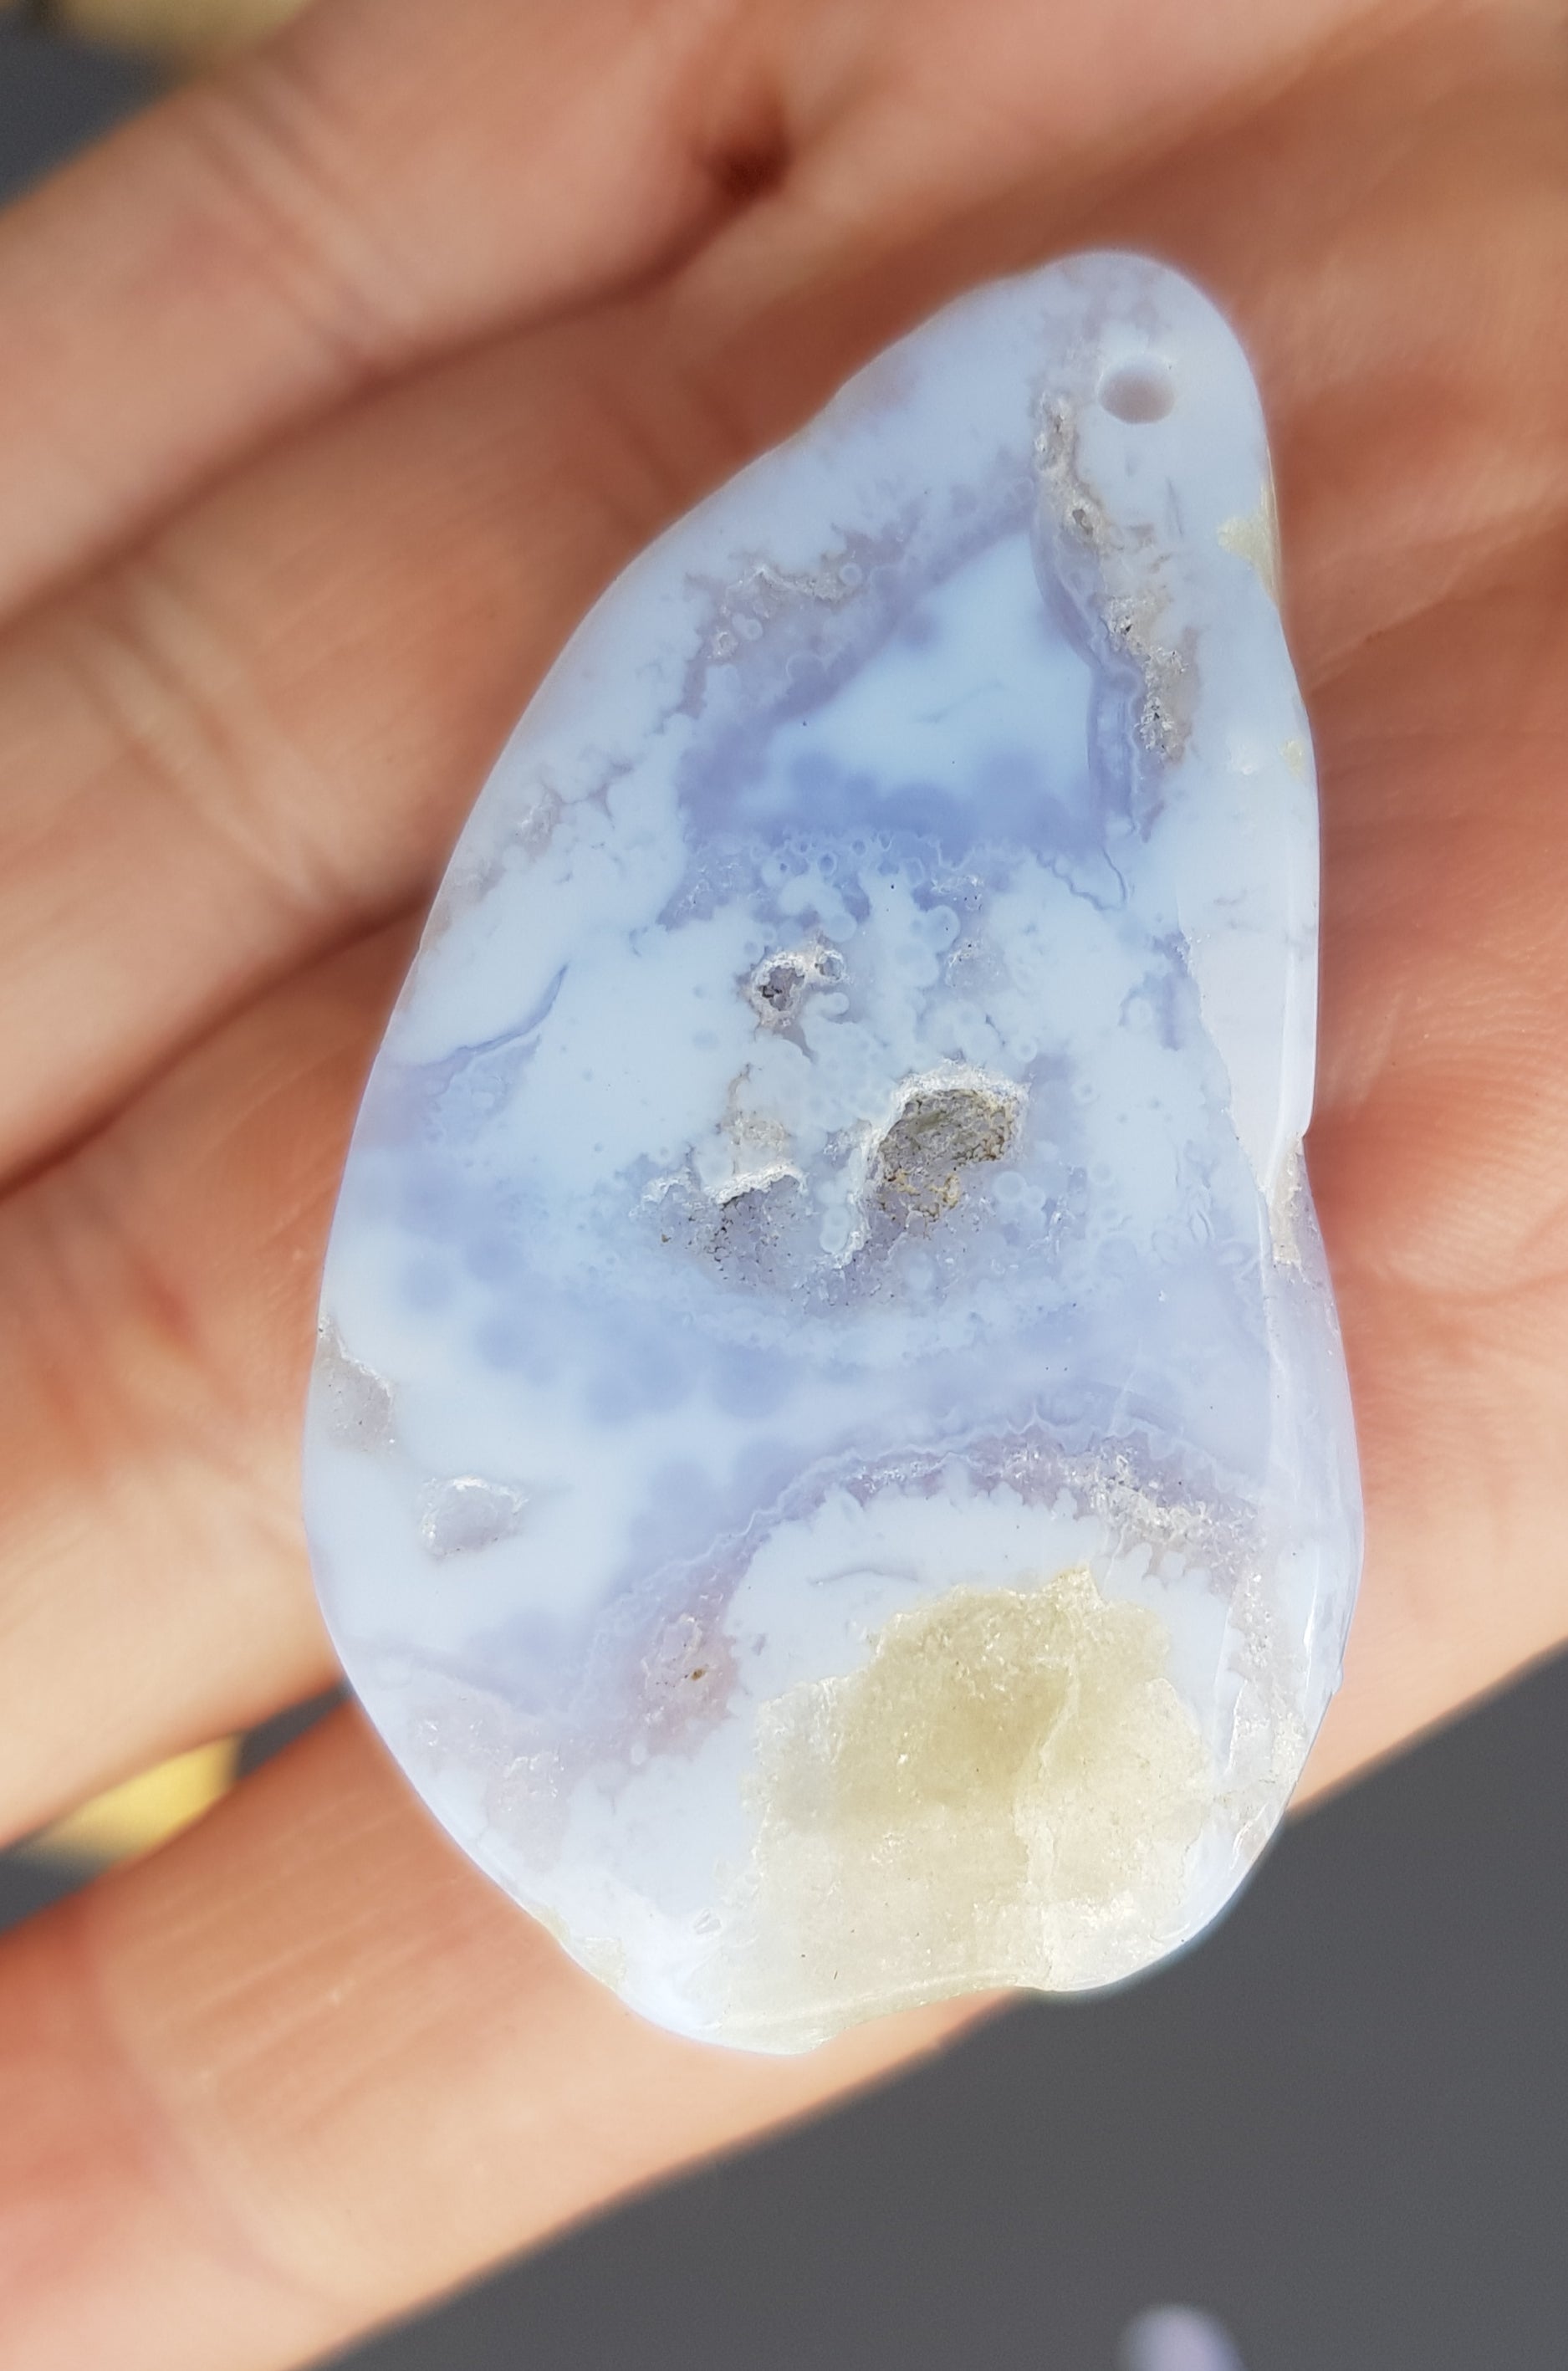 Blue lace agate with geode -  pendant